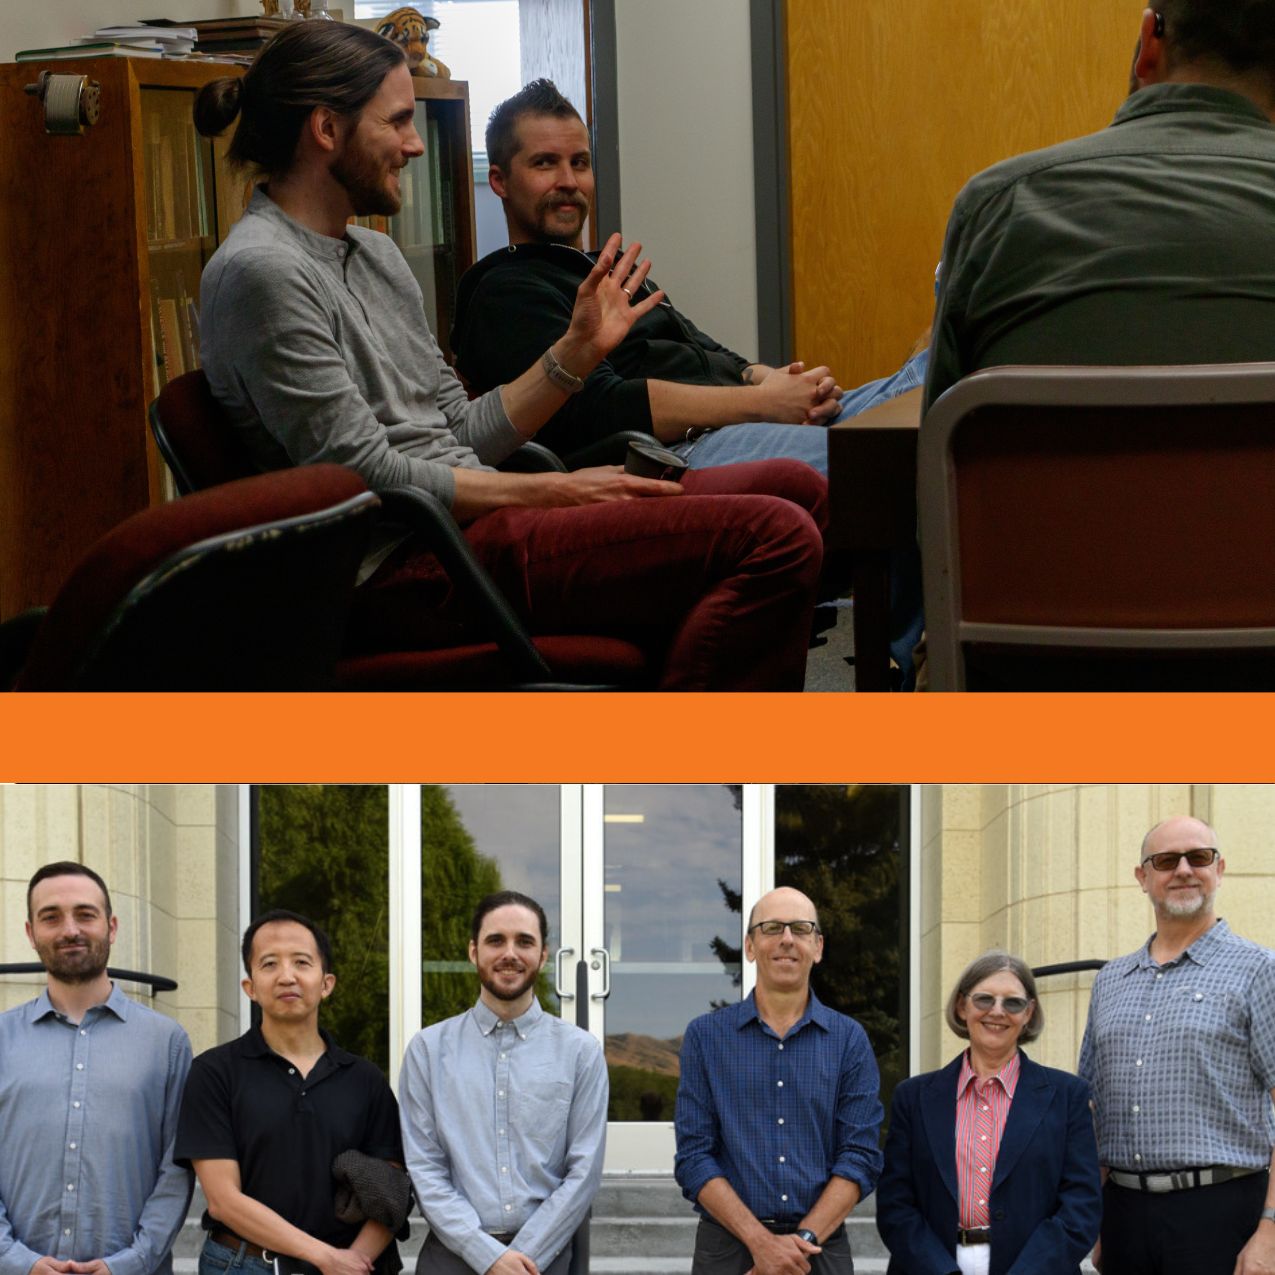 The top picture is of faculty members sitting around a large table having a discussion. One person is smiling and one is laughing. The second photo is the 6 faculty members standing outside the Liberal Arts Building.